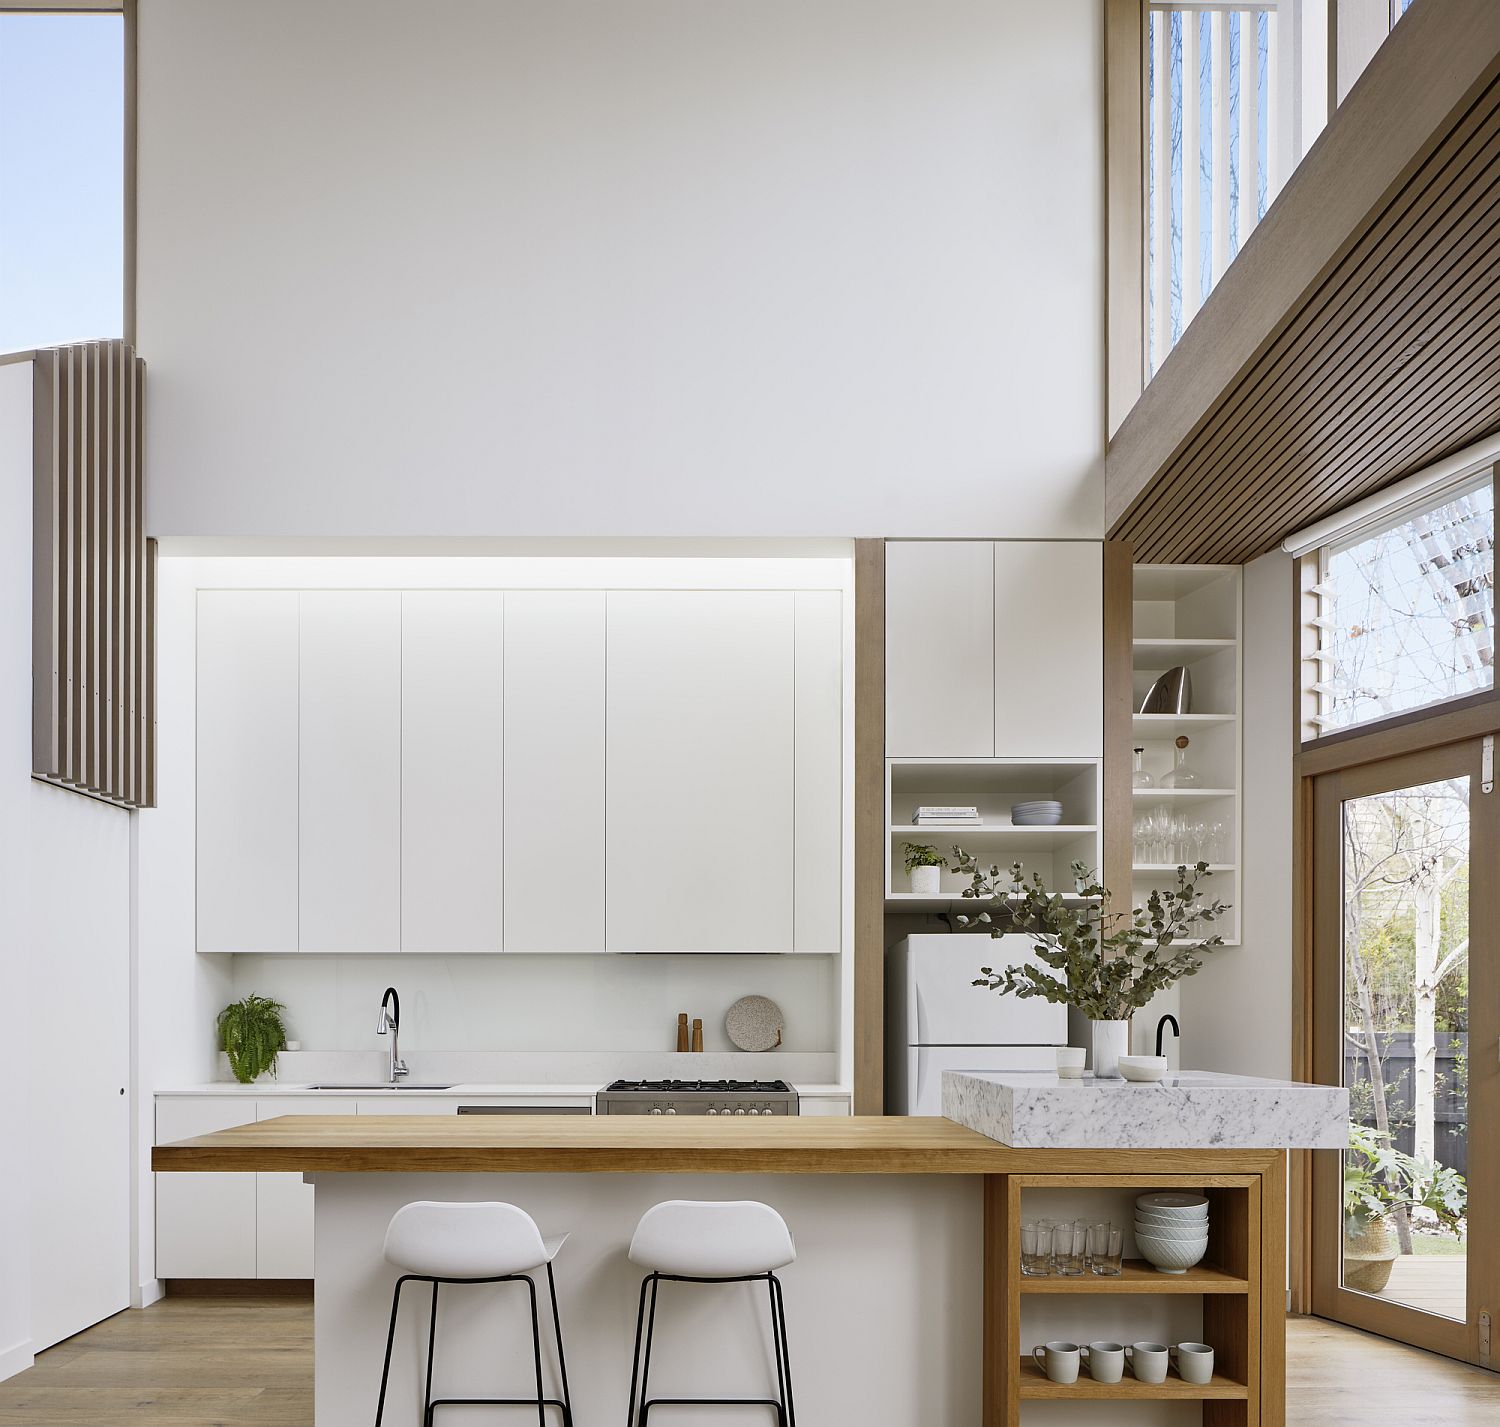 Double-height modern kitchen in white with wooden shelves